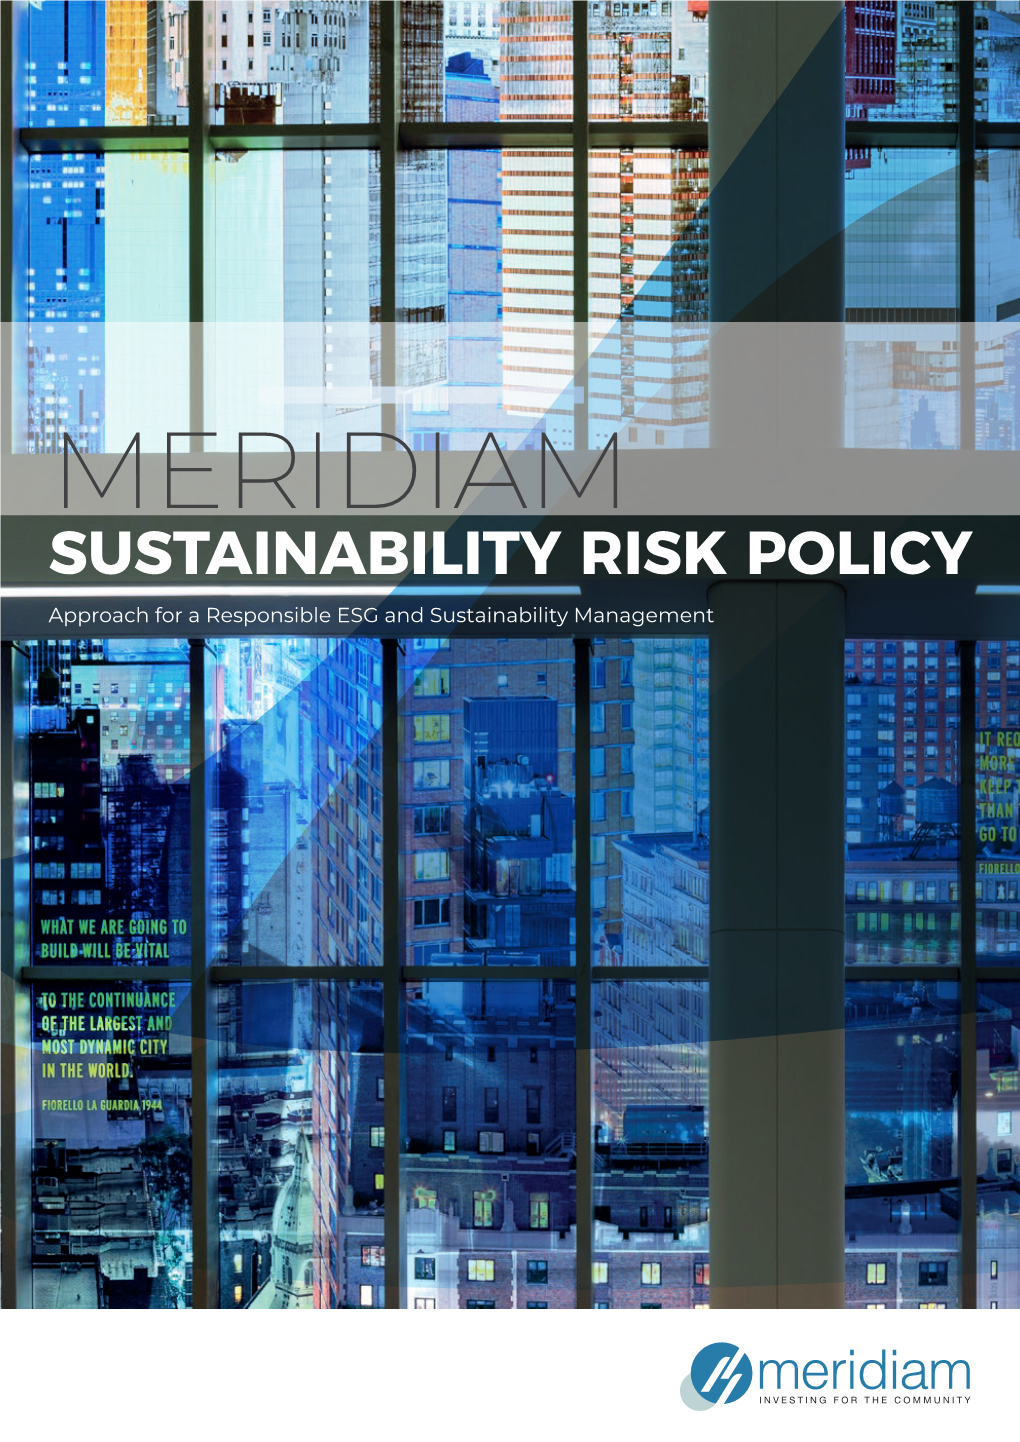 MERIDIAM SUSTAINABILITY RISK POLICY Approach for a Responsible ESG and Sustainability Management